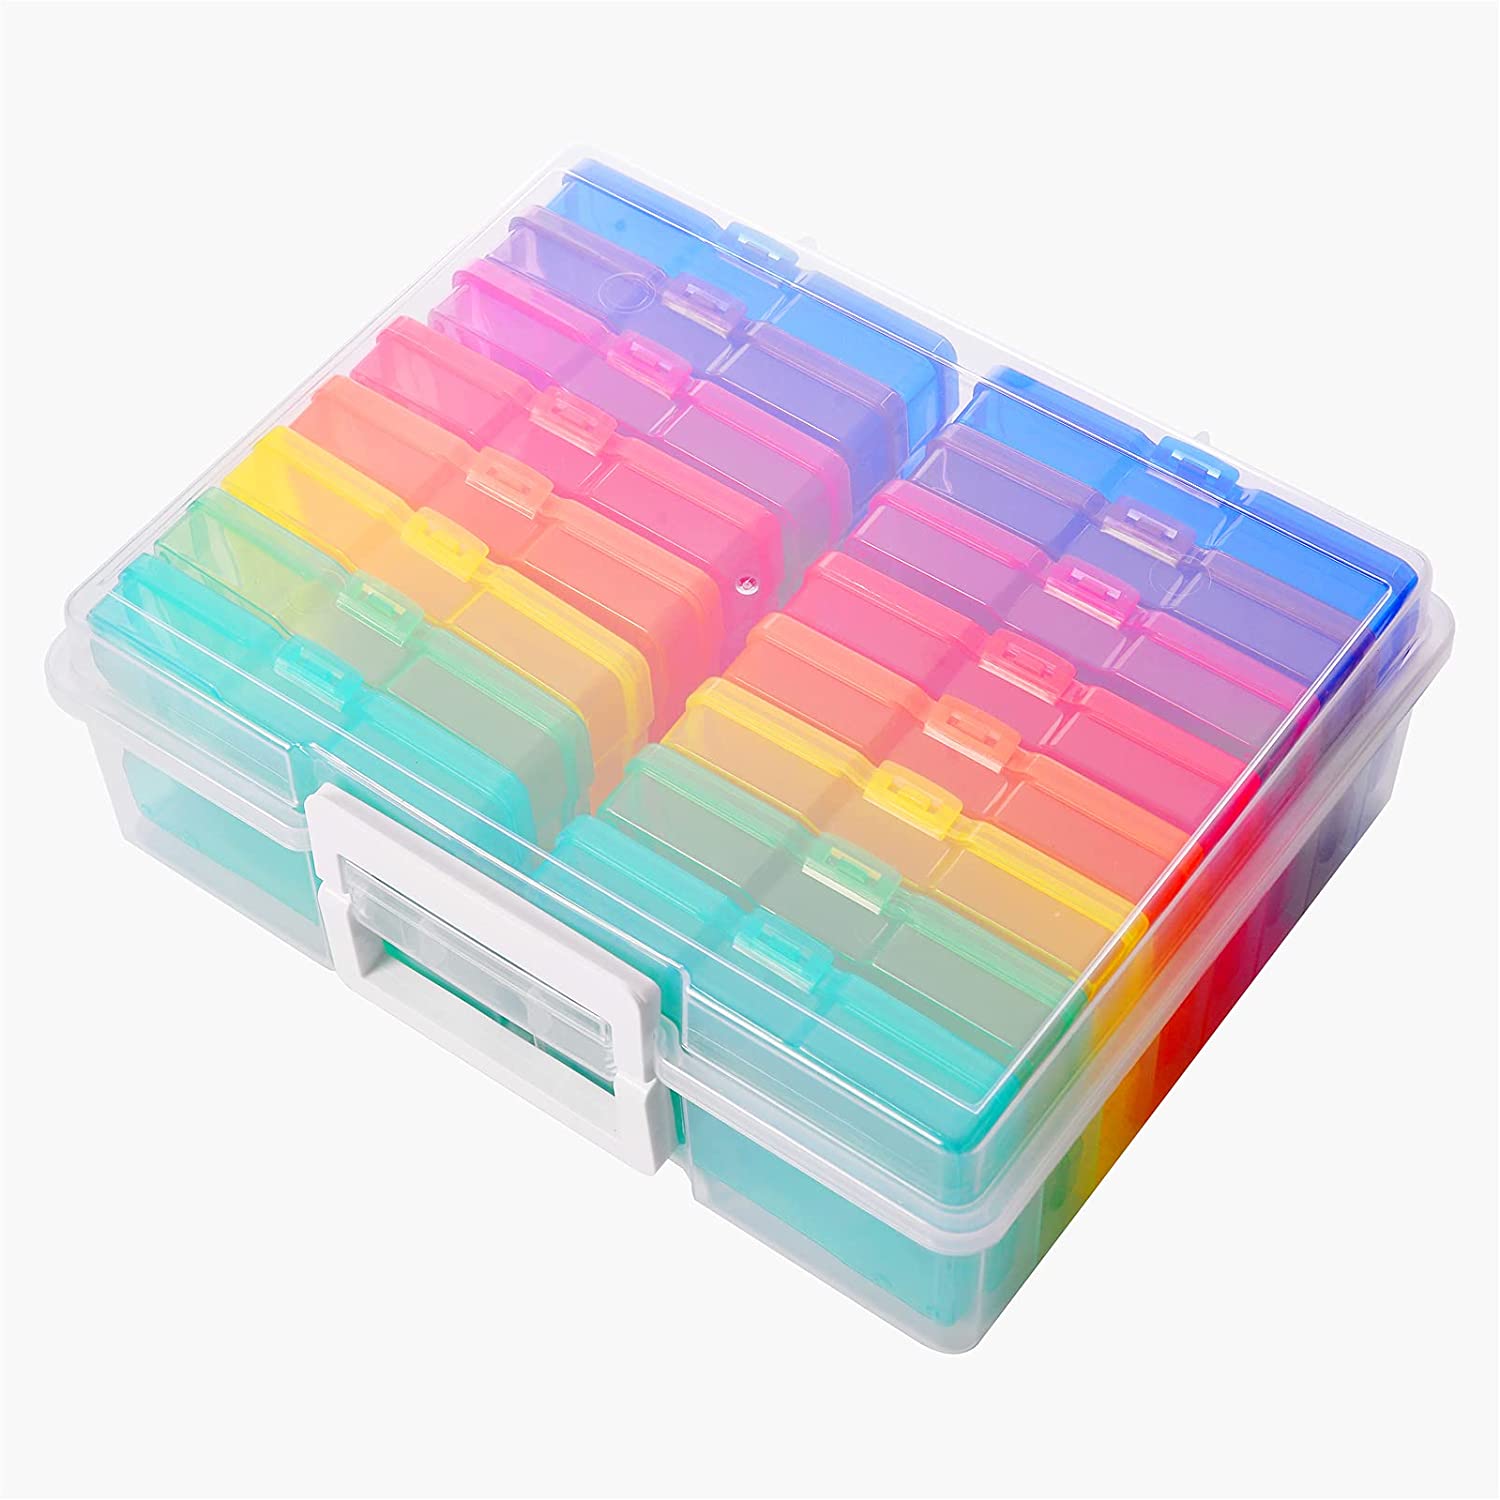 Zuvo Plastic Photo Storage Box With 16 Cases and Removable Dividers for  Organizing Photographs, Stamps, Stationery, Jewellery, Seed, Toys, Arts and